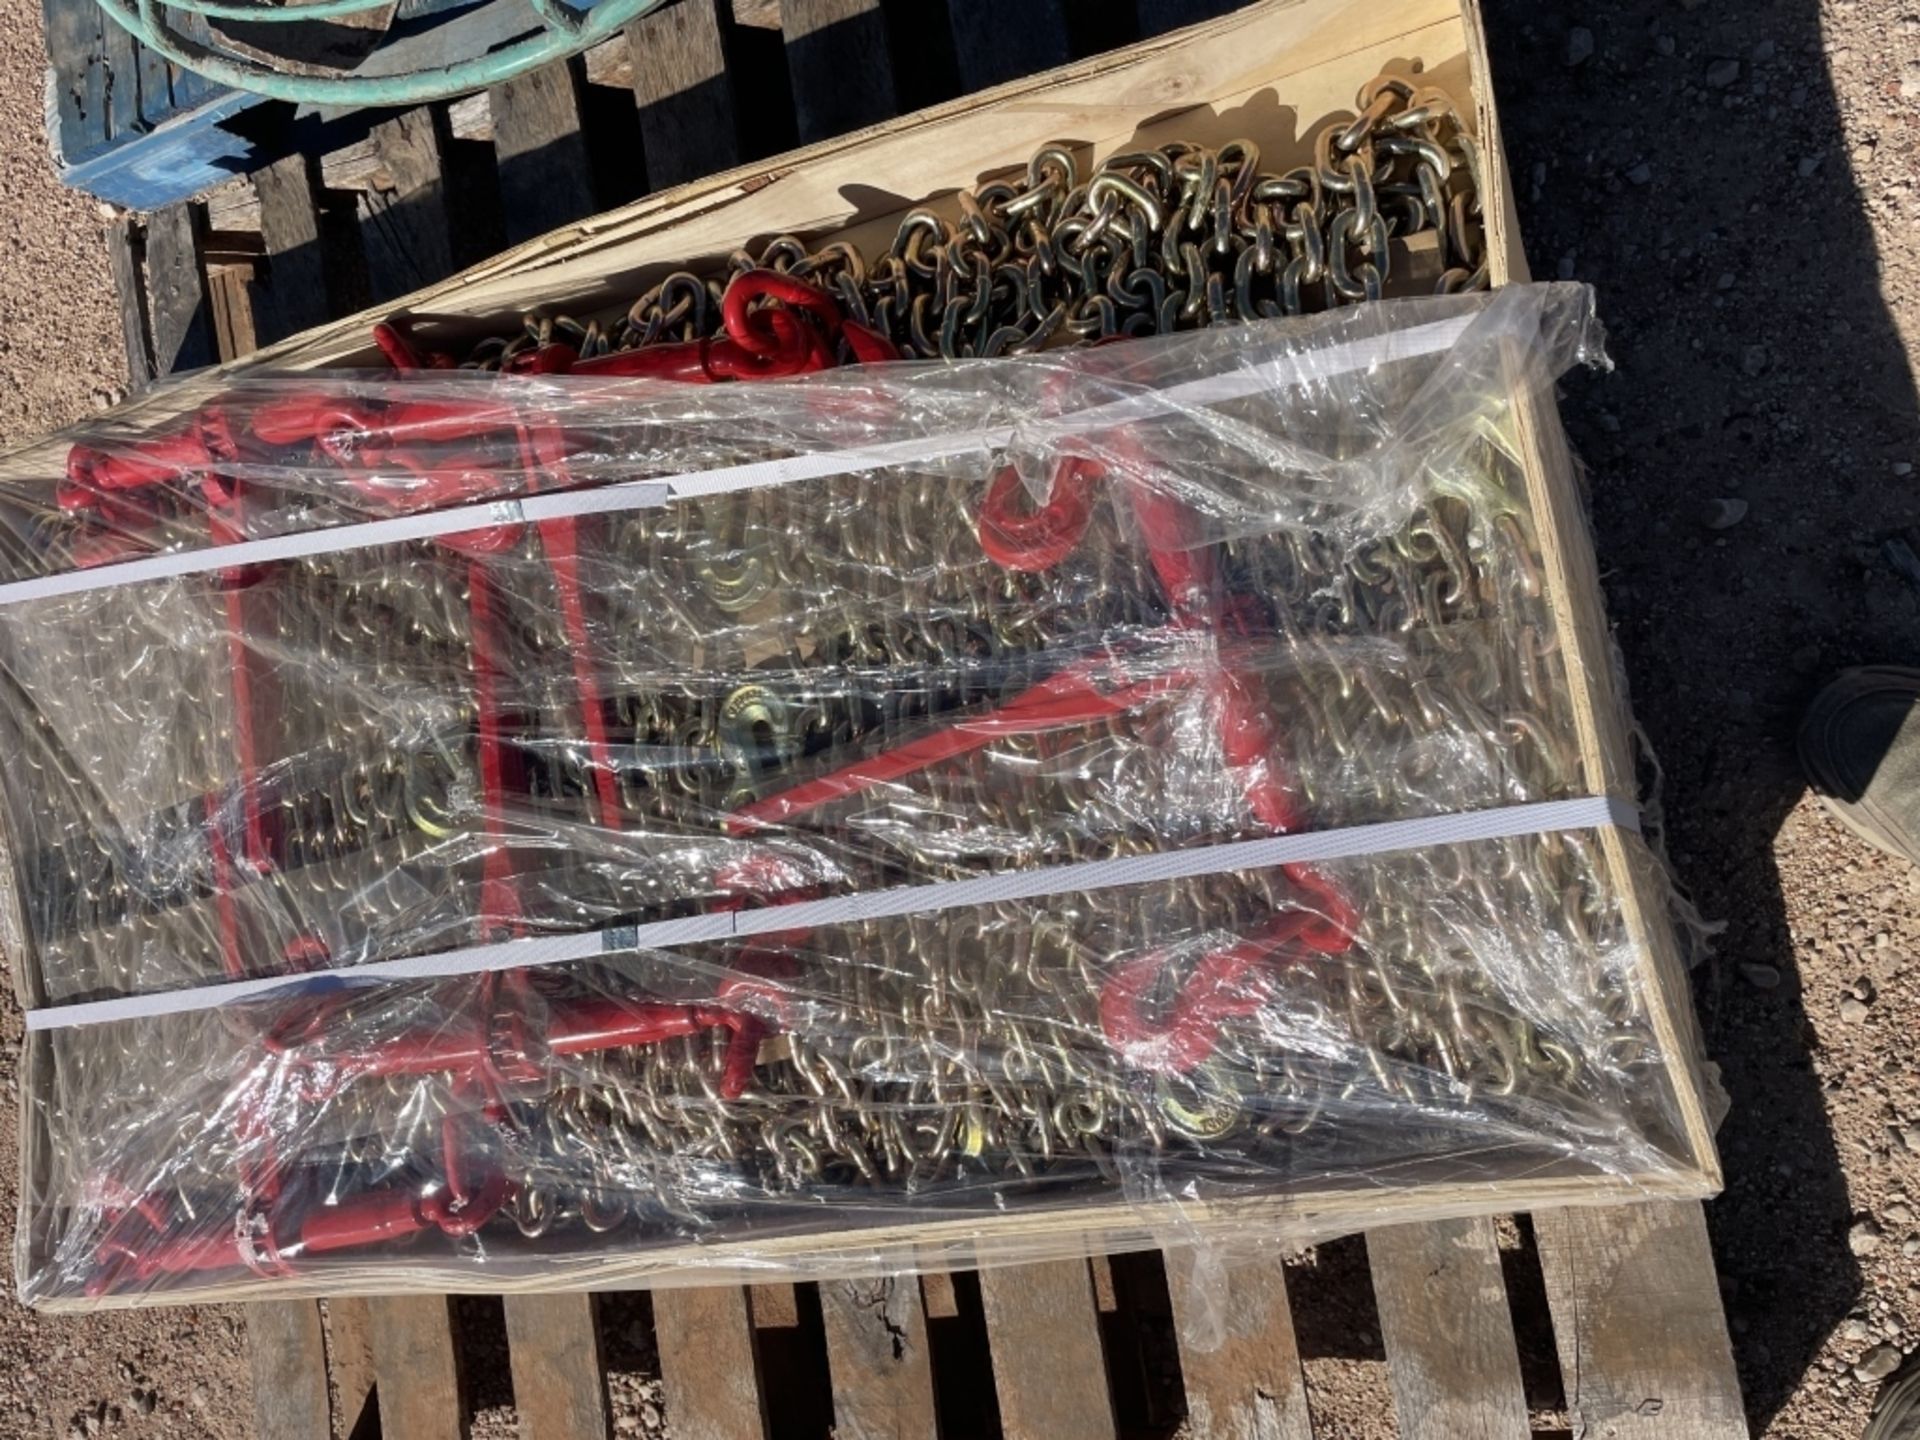 Lot Of 5 3/8 Ratchet Binders And 10 20' Chains - Image 4 of 4